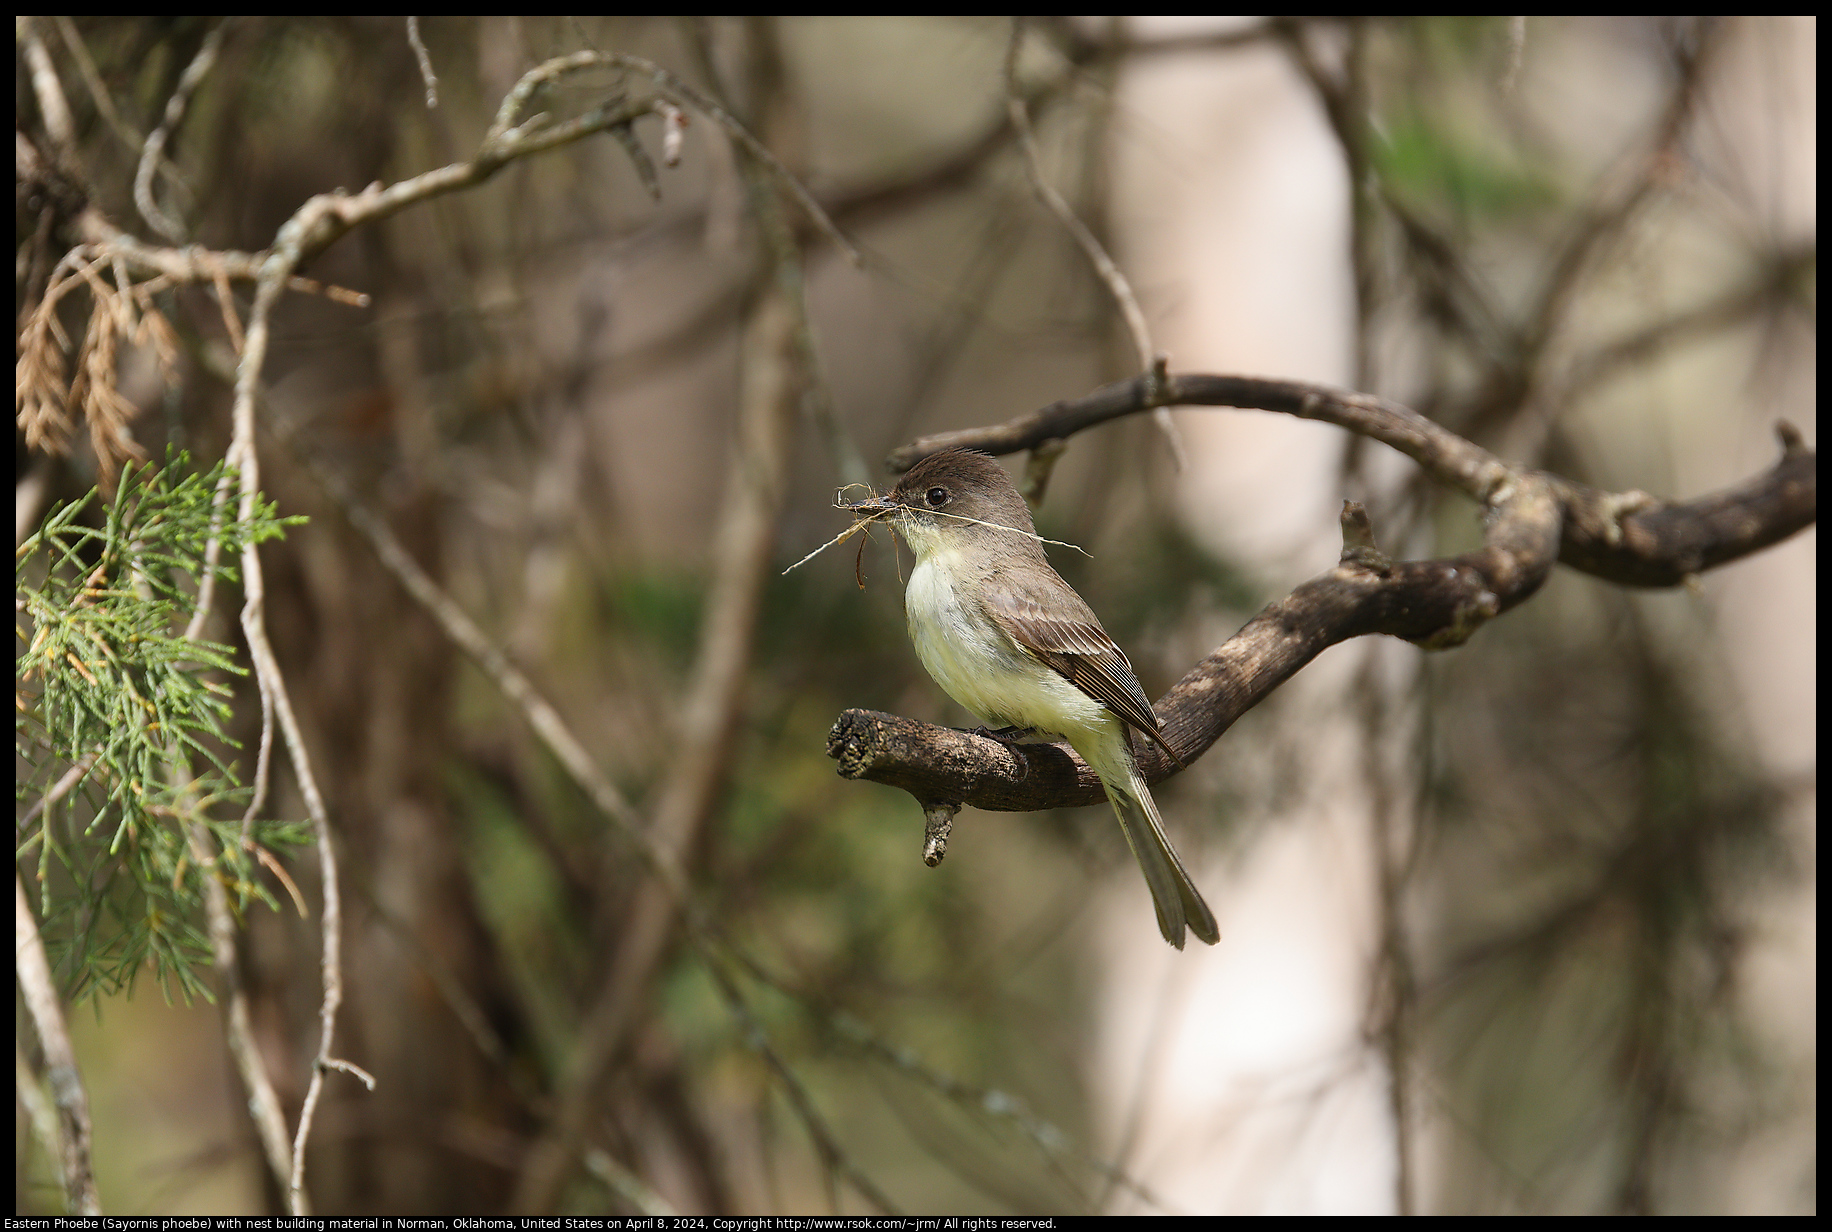 Eastern Phoebe (Sayornis phoebe) with nest building material in Norman, Oklahoma, United States on April 8, 2024